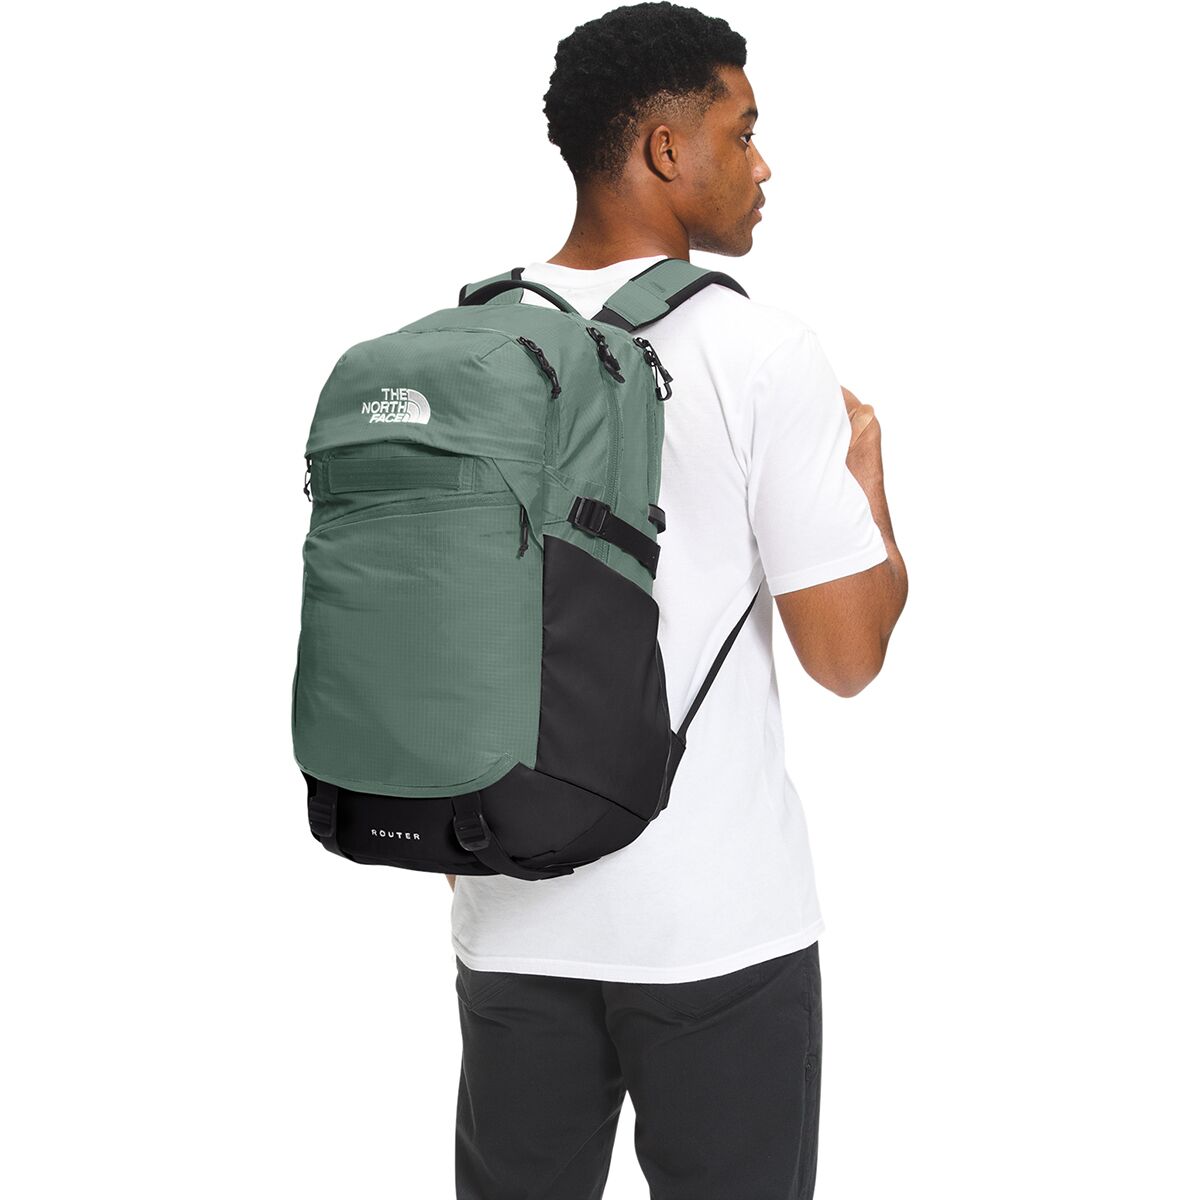 The North Face Router 35L Backpack